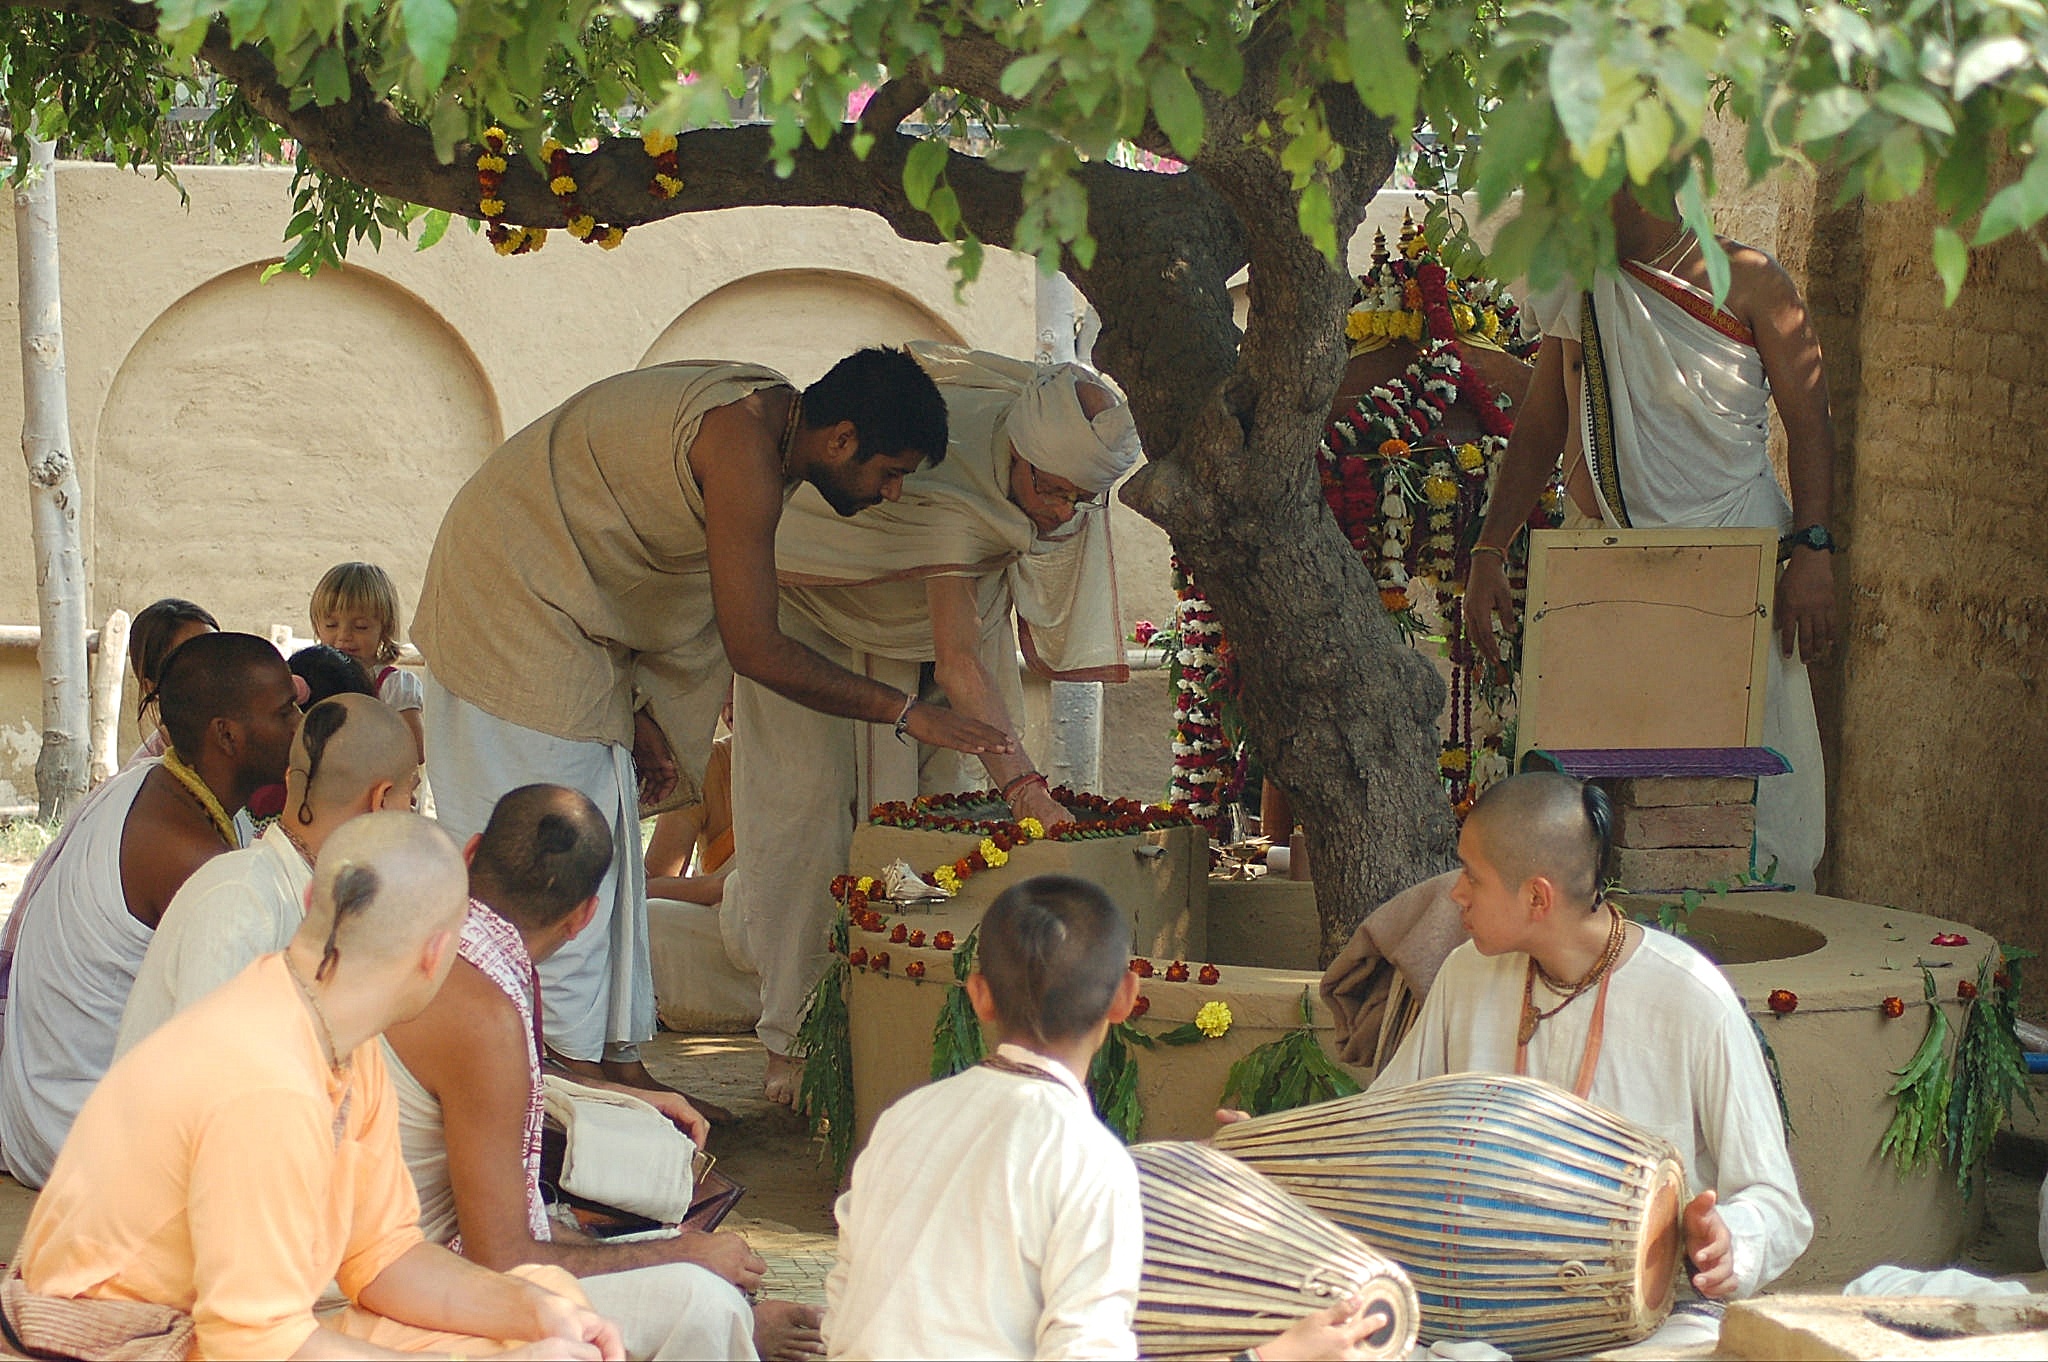 Devotees at a courtyard festival